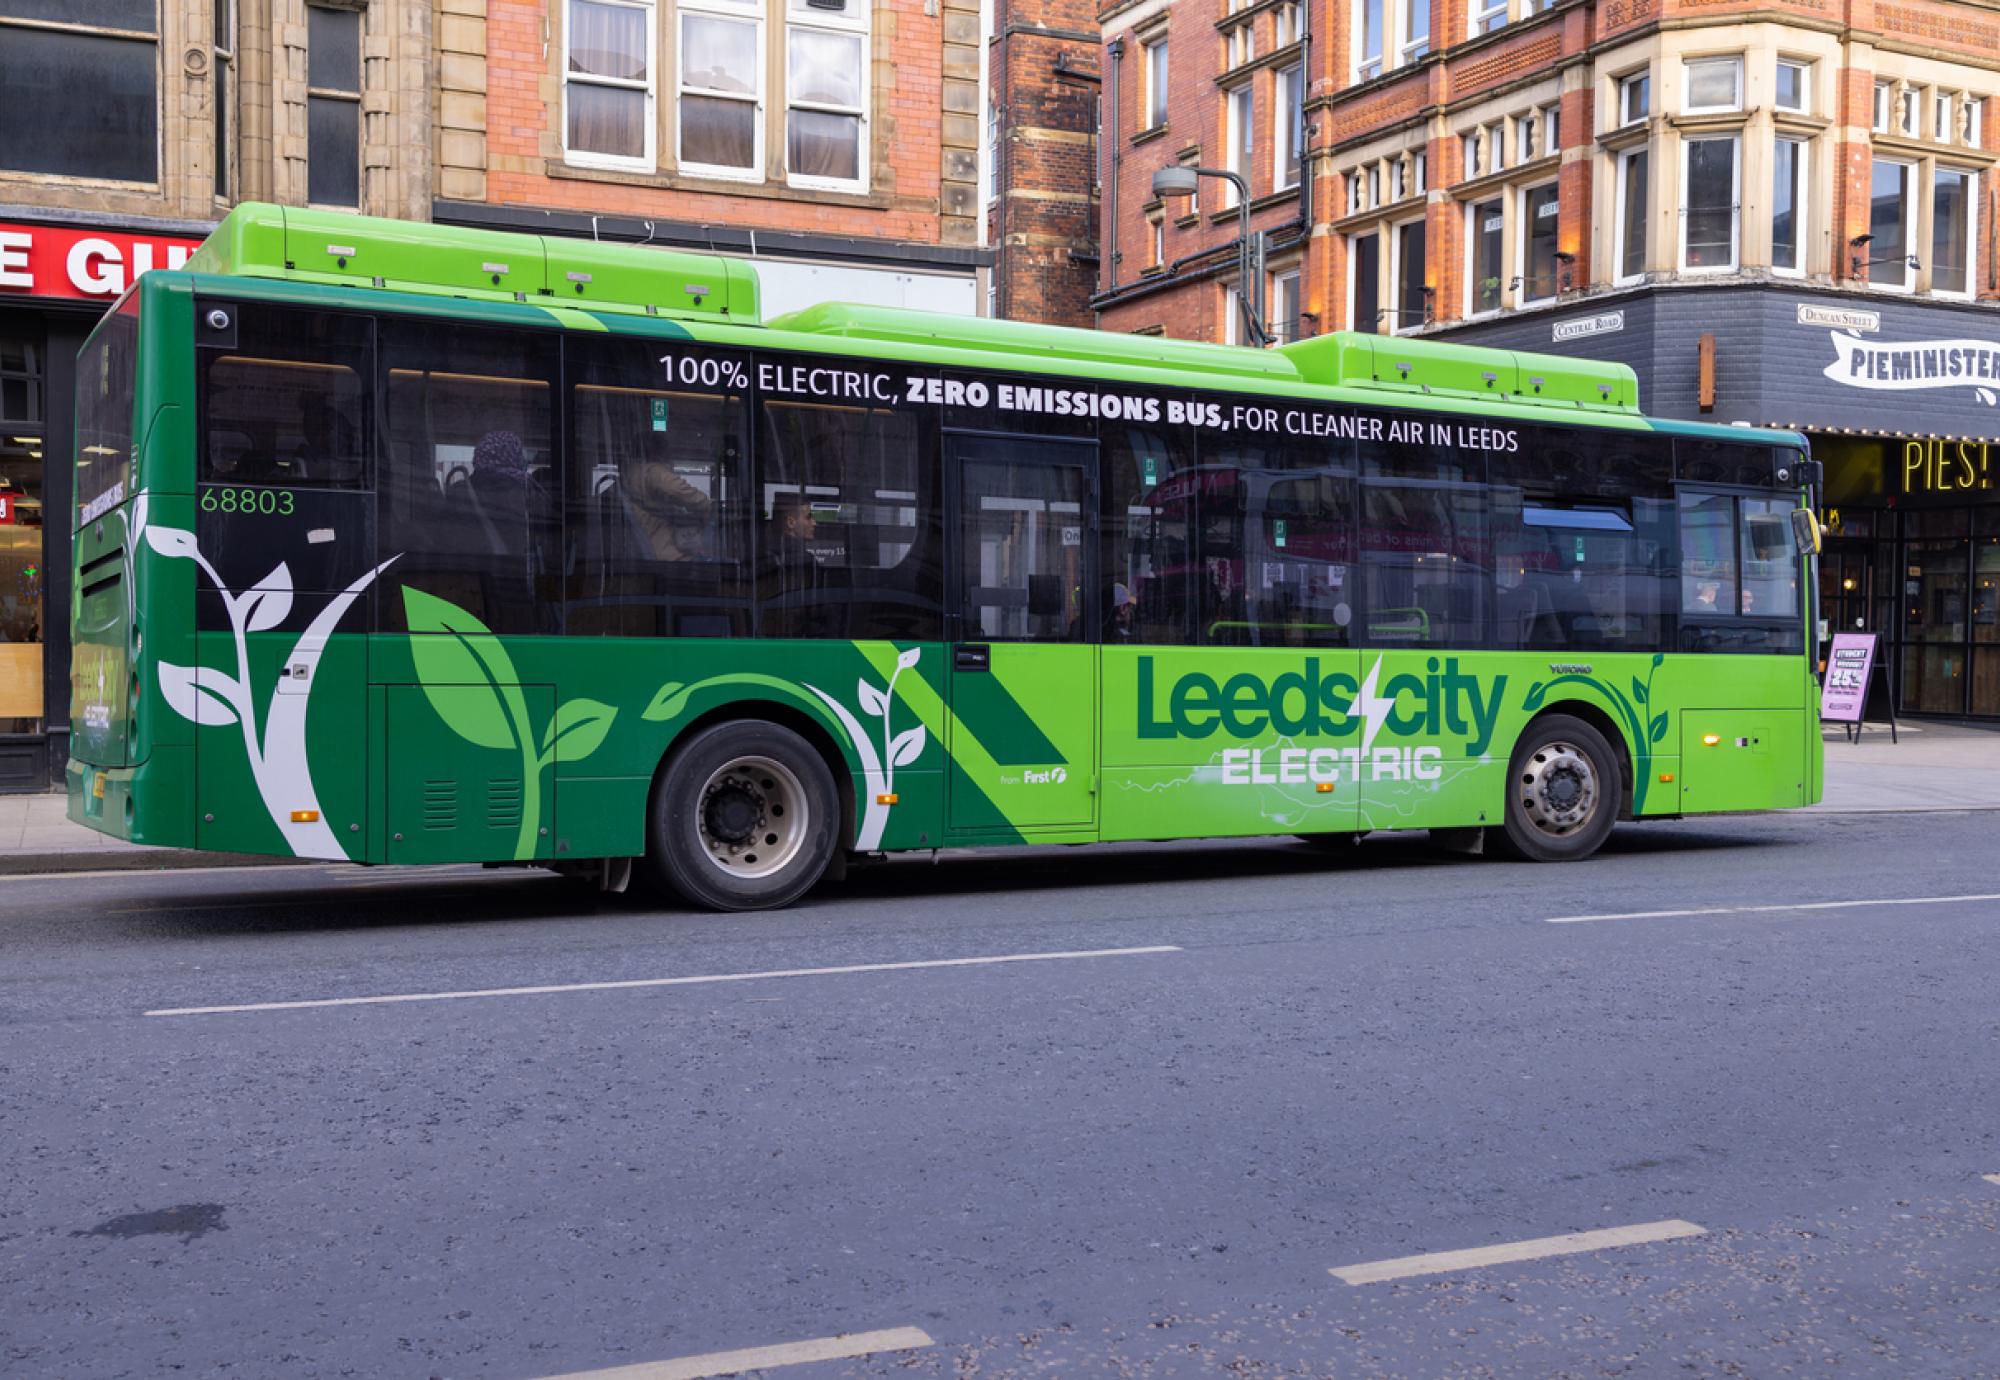 Photo taken in the Leeds City Centre showing an electric bus in the city, the bus is 100% Electric with zero Emissions for cleaner air in the Leeds City Centre